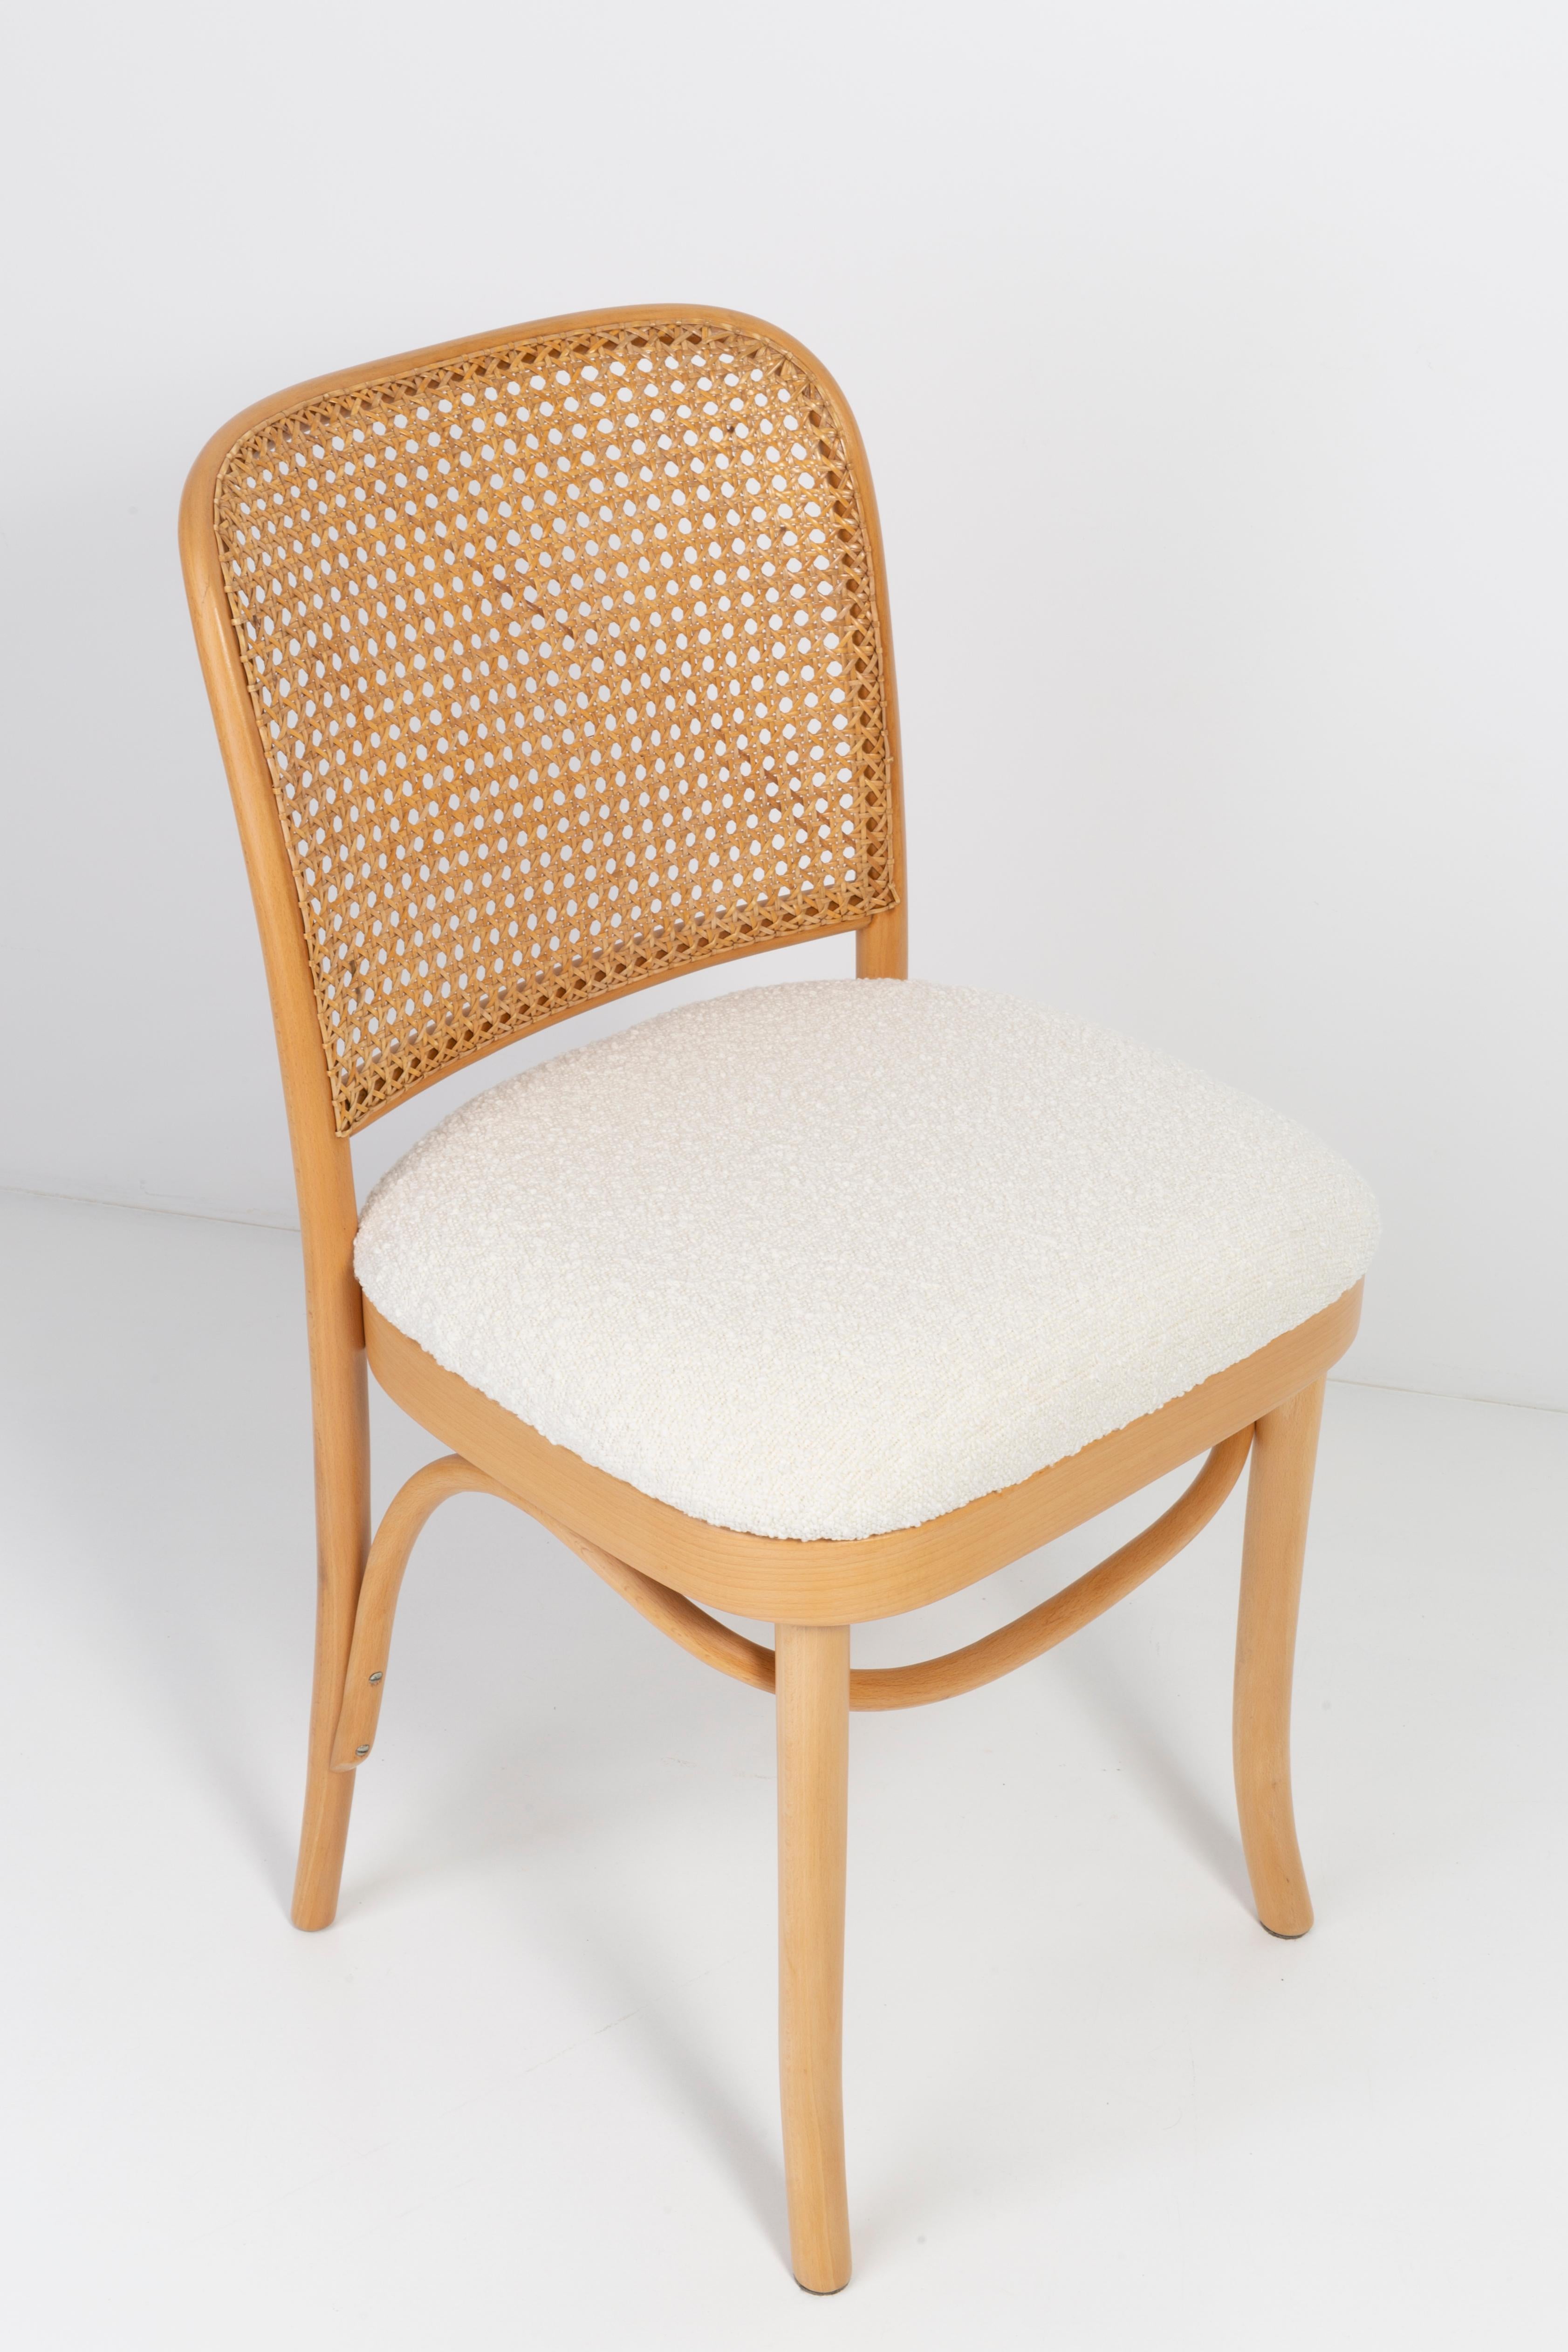 Light White Boucle Thonet Wood Rattan Chair, 1960s For Sale 2